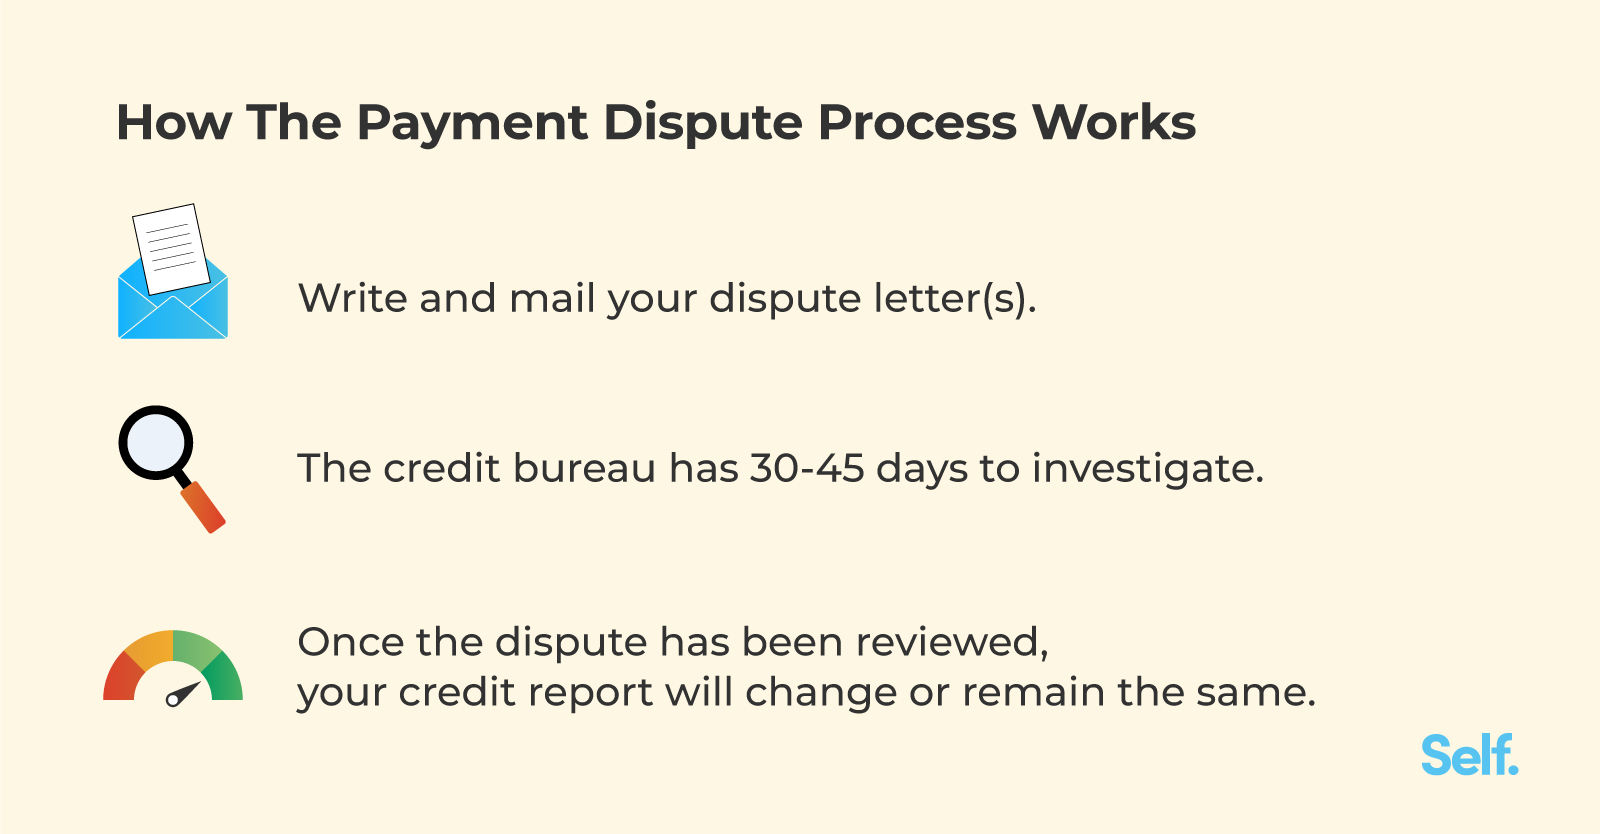 How The Payment Dispute Process Works